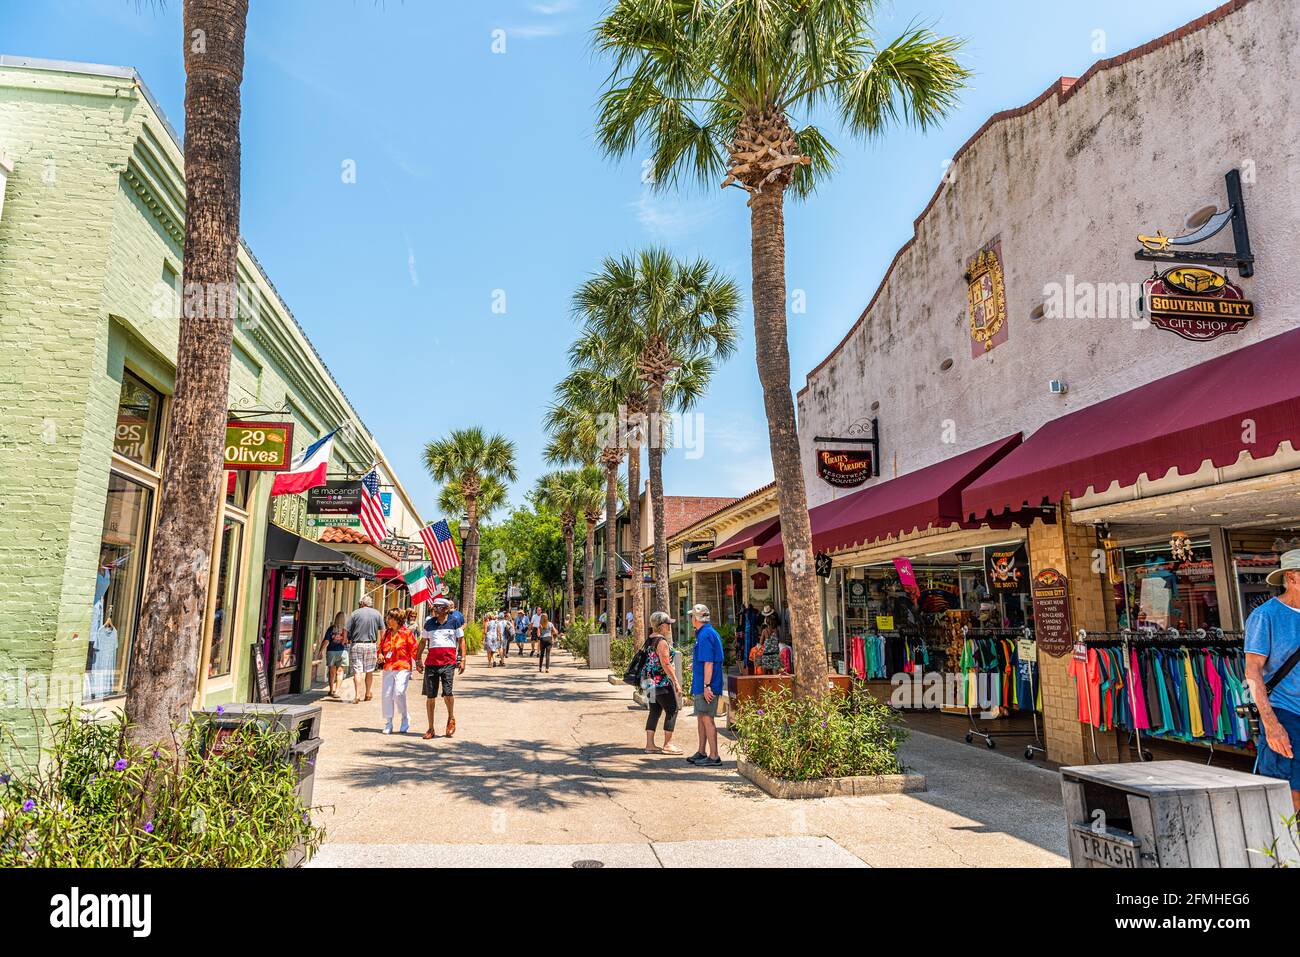 St. Augustine, USA - May 10, 2018: People walking shopping at famous Florida city Saint George Street on summer day by stores shops and restaurants in Stock Photo